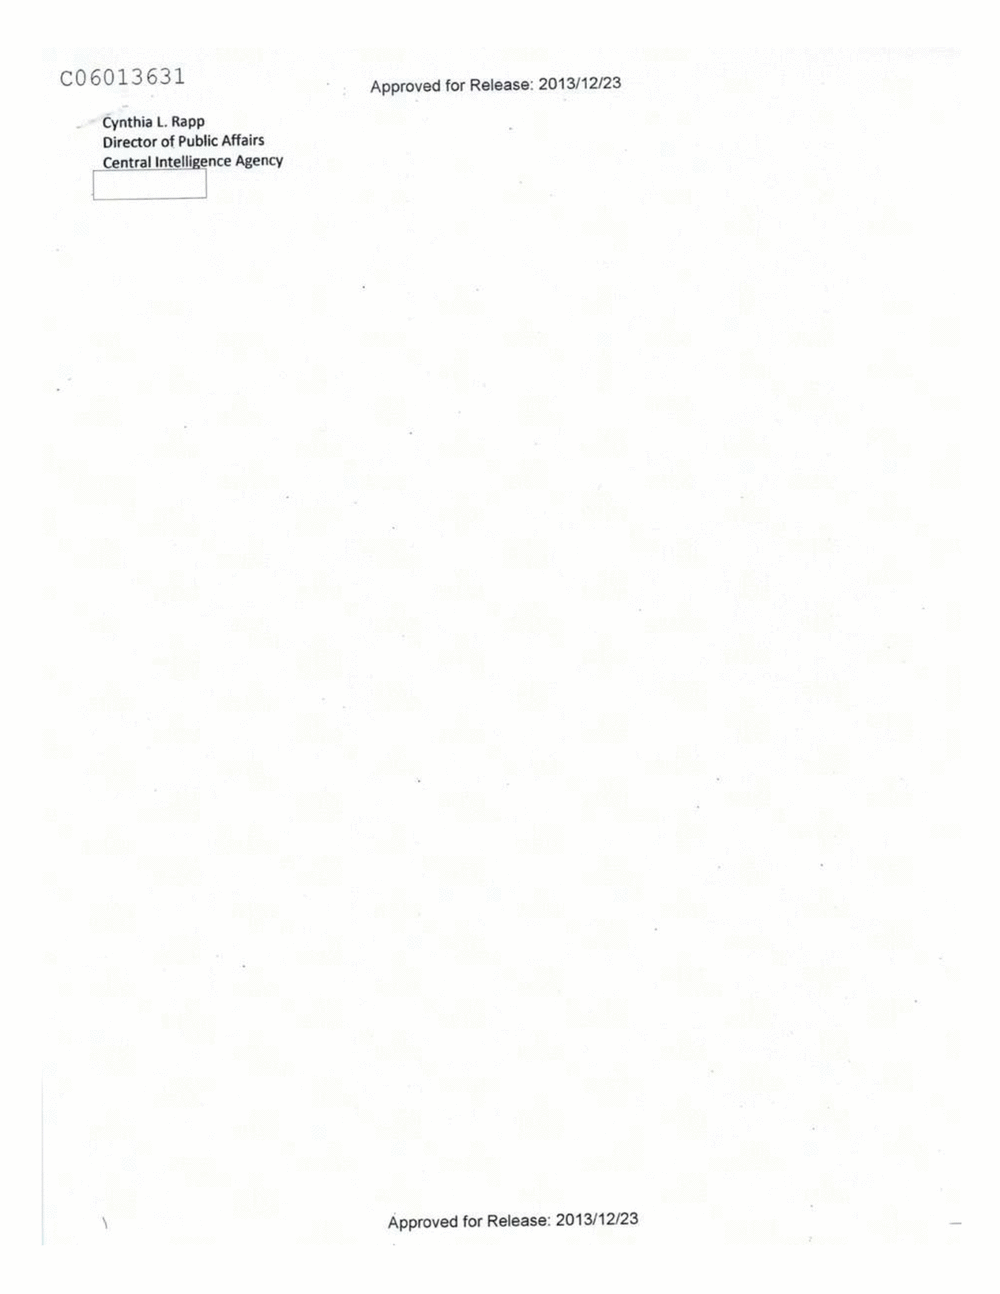 Page 468 from Email Correspondence Between Reporters and CIA Flacks